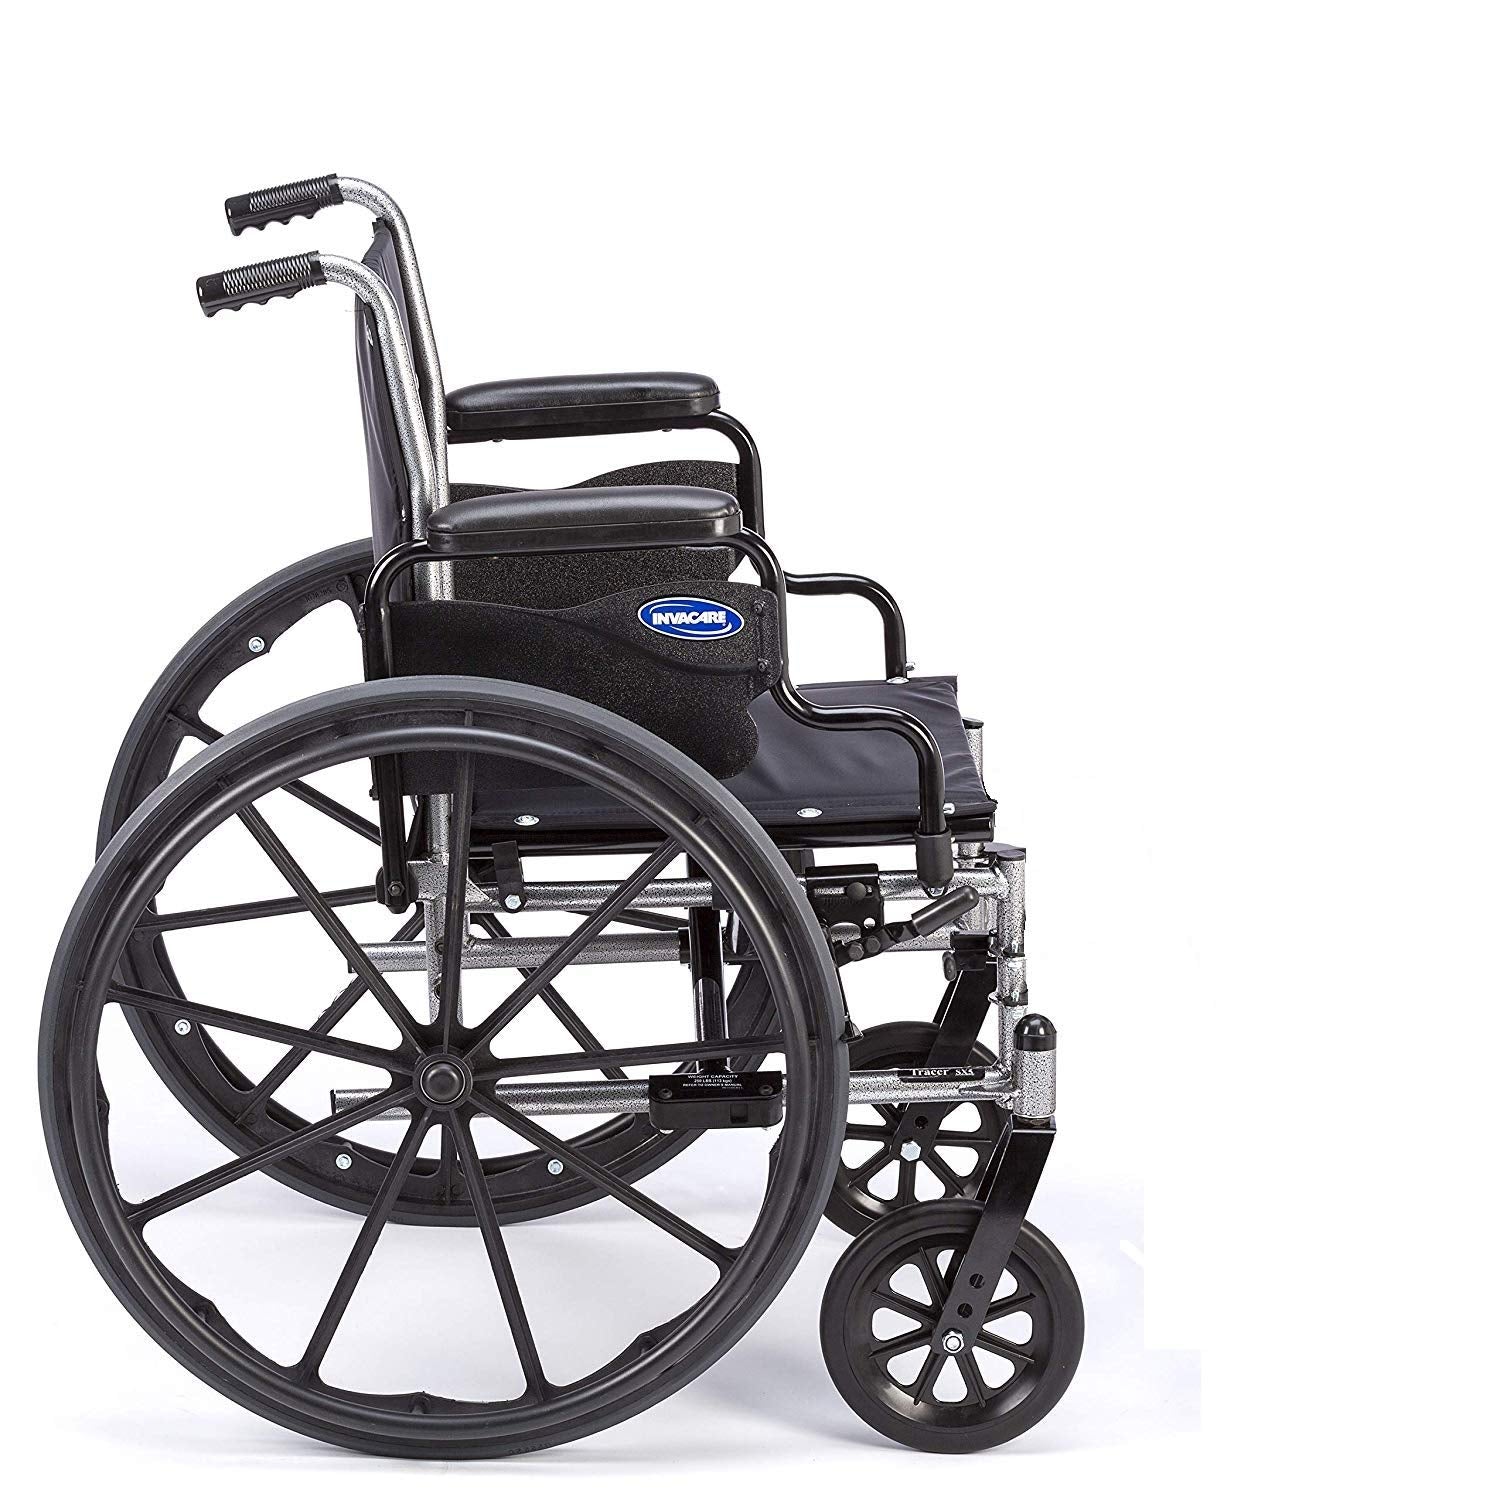 A side view of Invacare's Tracer SX5 wheelchair displaying the desk-length armpads for added convenience while sitting at a desk or table.  The image highlights the smooth urethane rear tires. The wheelchair does not contain legrests or footrests on the wheelchair.  The image is on a white background.